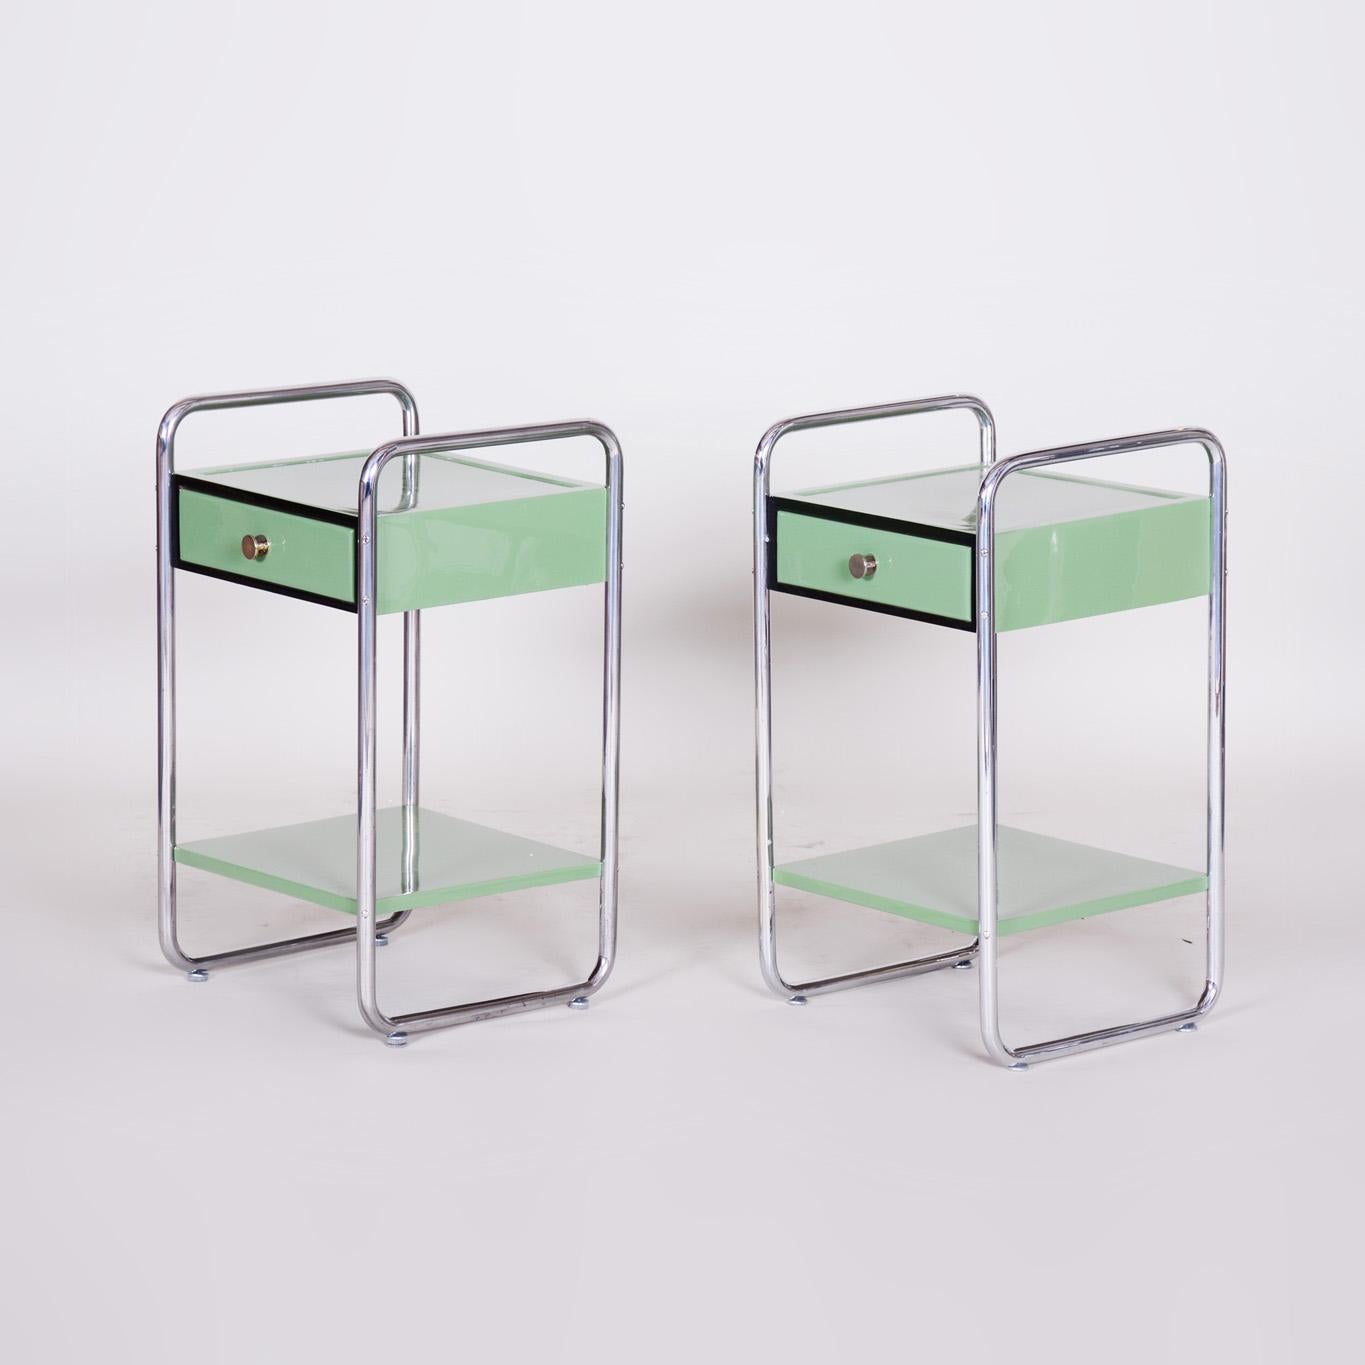 Mid-20th Century Restored Bauhaus Pair of Bed-Side Tables, Chrome-Plated Steel, Czech, 1930s For Sale